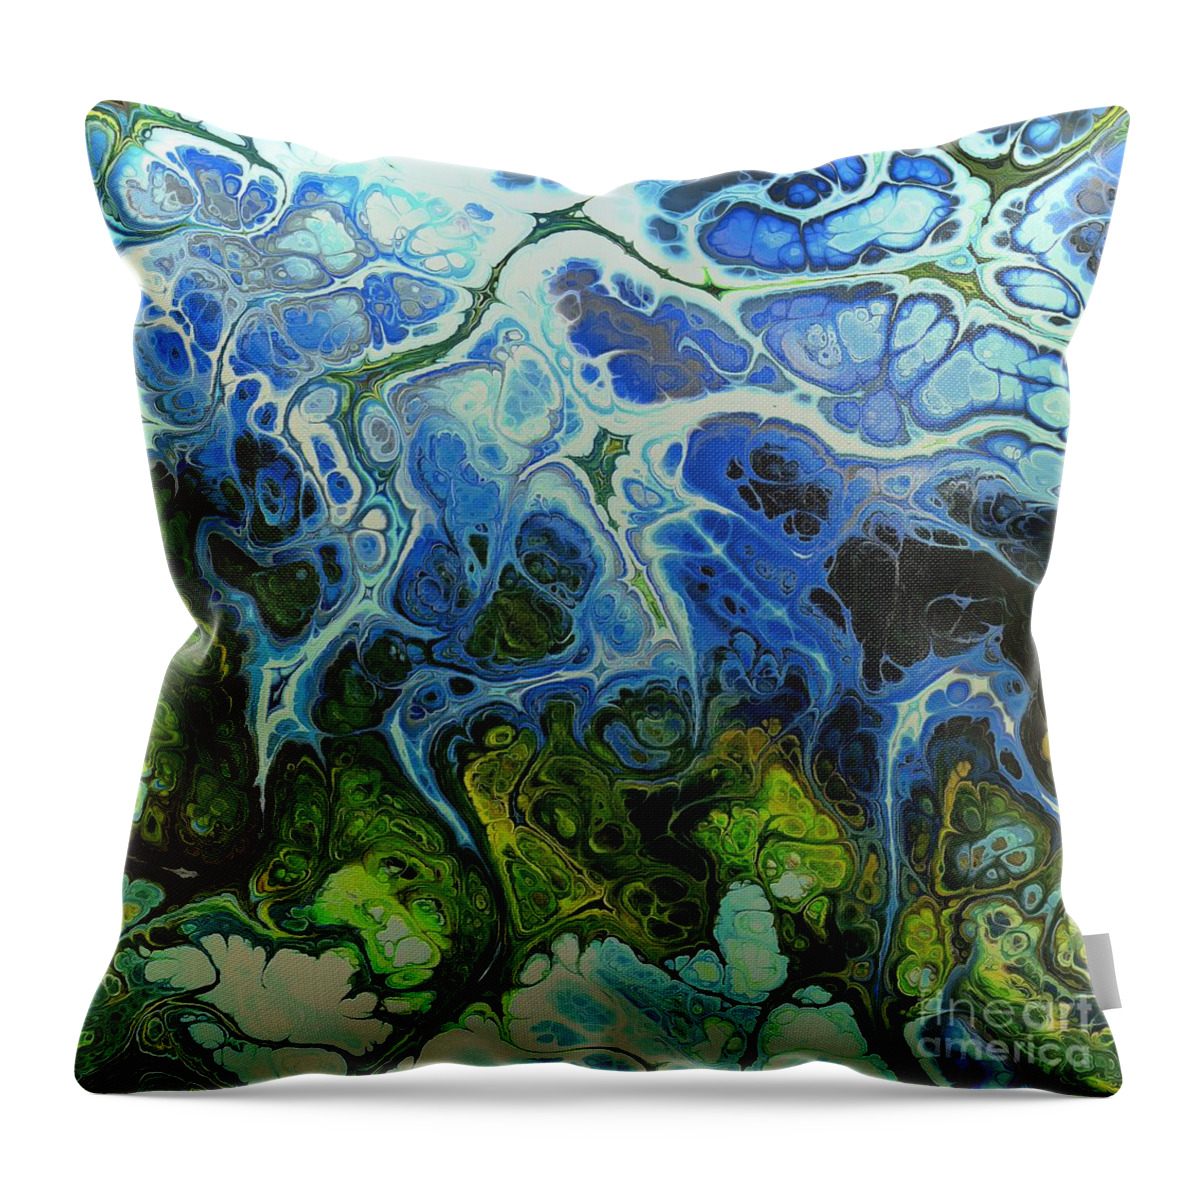 Blue Throw Pillow featuring the photograph Northwest Swirl of Blue Green Earth by Sea Change Vibes